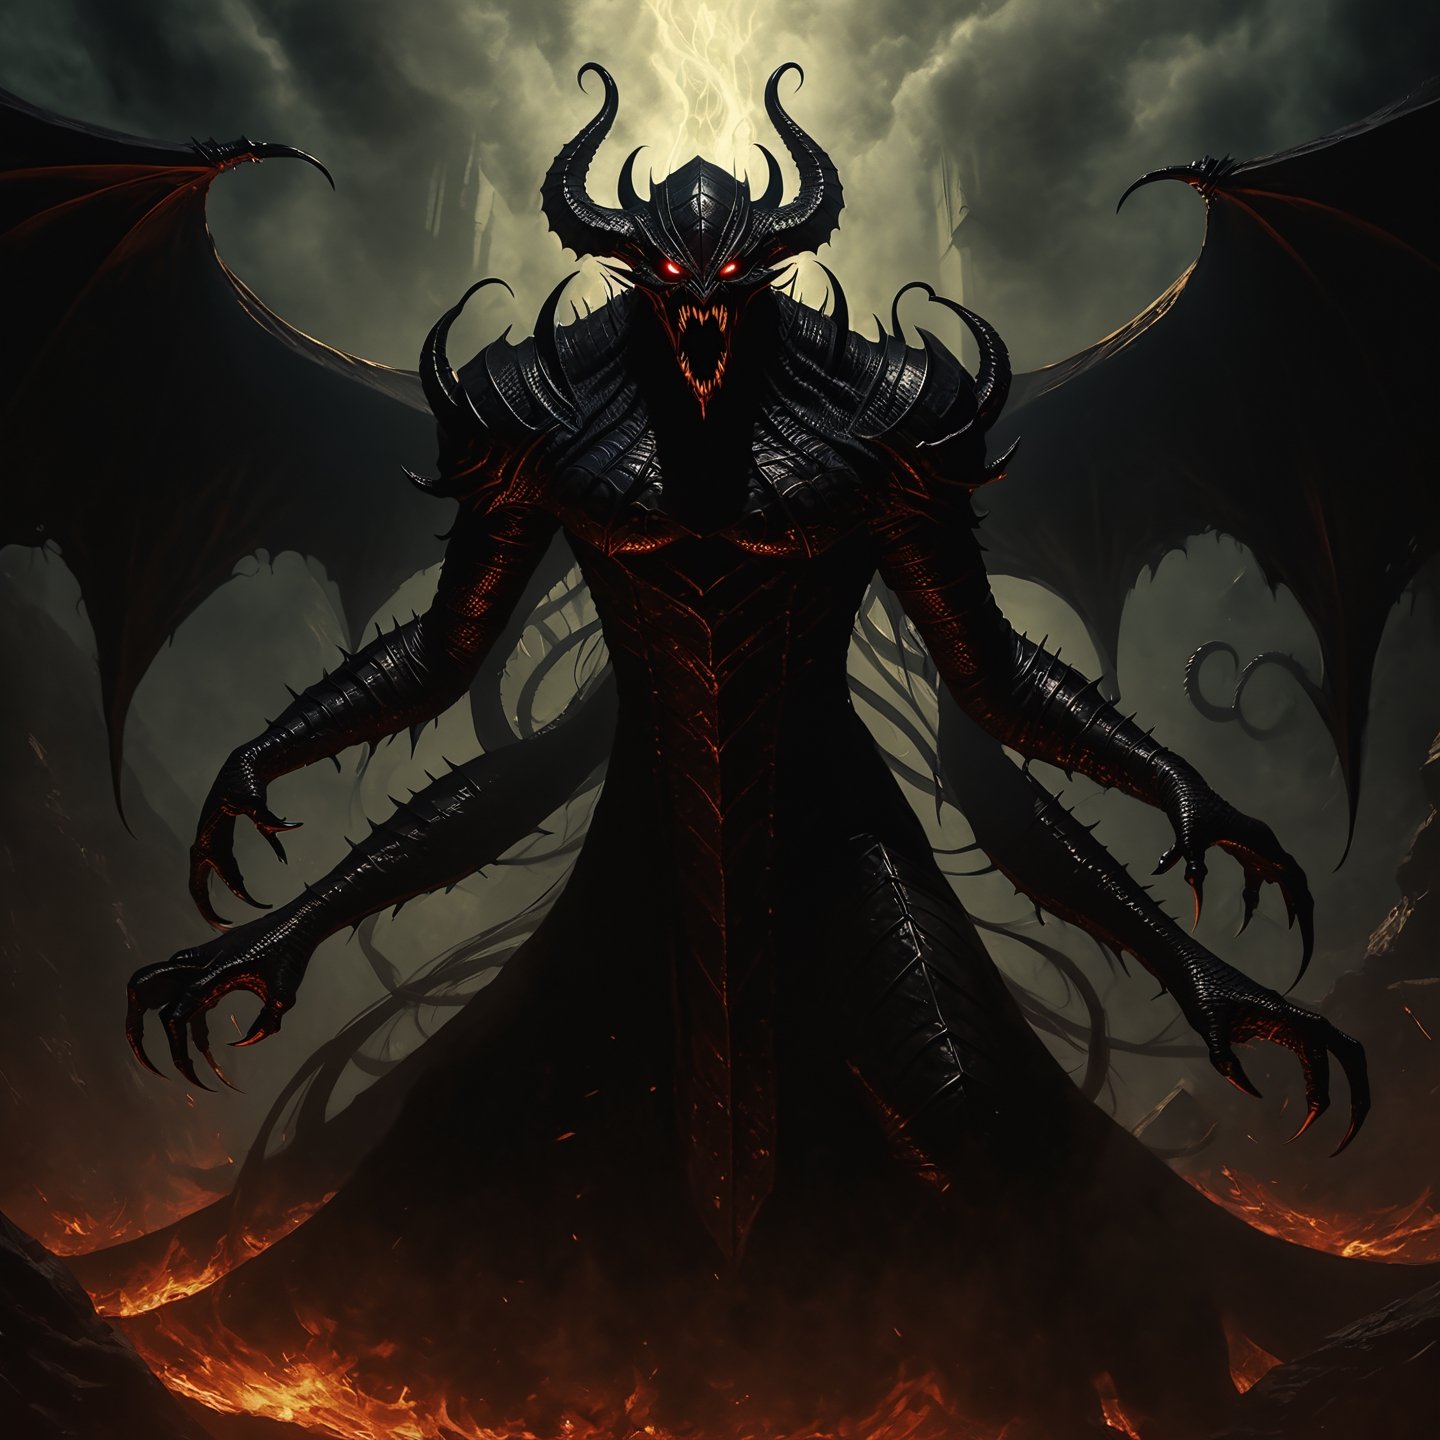 (portrait:1.5), Shadowfiend is a demon of unfathomable power, an evil entity that moves within the folds of eternal twilight. Its form showcases a majestic combination of fluid darkness and flickering lights, creating a spectral contrast that evokes both terror and awe simultaneously.

Its membranous wings, as black as midnight, stretch out in a menacing embrace, while sinisterly glowing eyes of a deep crimson peer from an expressionless visage. Shadowfiend wears an armor composed of ranks of shadows coiling around its body, a corrupted protection that comes to life with fluid and ominous movements.

Spider-like claws extend forward, ready to tear the soul of those who dare to challenge its presence. A long serpent-like tail twists in the air, emitting dark hisses that send shivers down the spine of anyone who hears them.

Shadowfiend is the lord of shadows, the demon that feeds on hidden fears and shattered dreams. Its presence on tensor.art translates into a visual experience that captures the very essence of fear, blending the mystery of darkness with the relentless power of a dark demon.




,HellAI